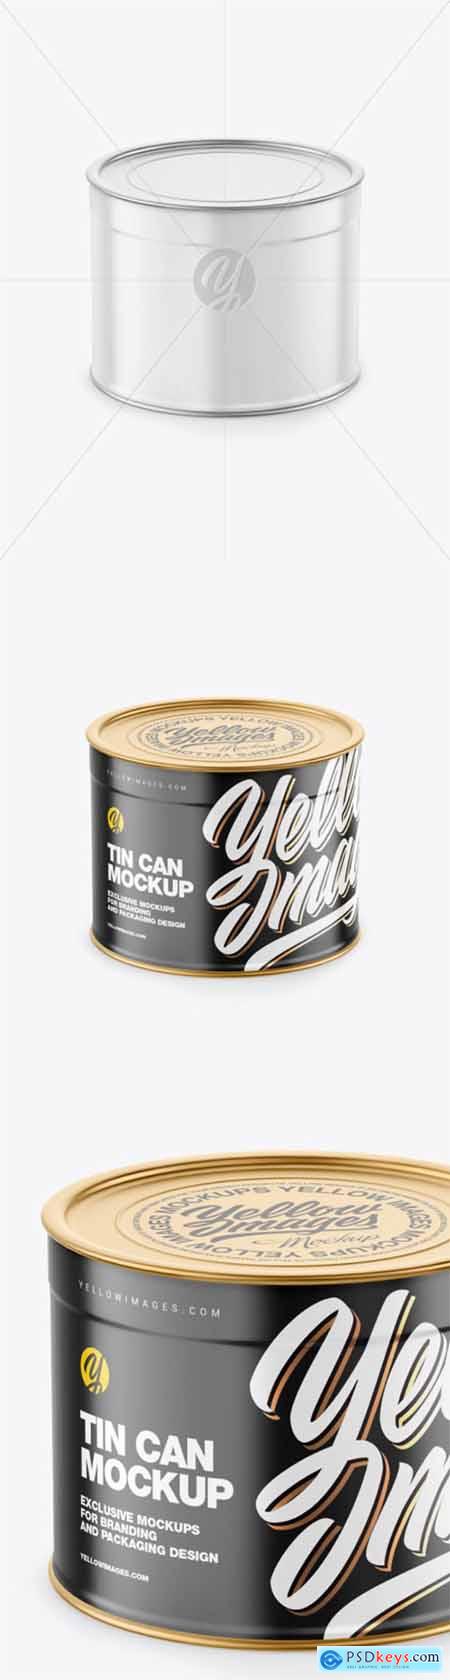 Download Glossy Tin Can Mockup 60233 Free Download Photoshop Vector Stock Image Via Torrent Zippyshare From Psdkeys Com